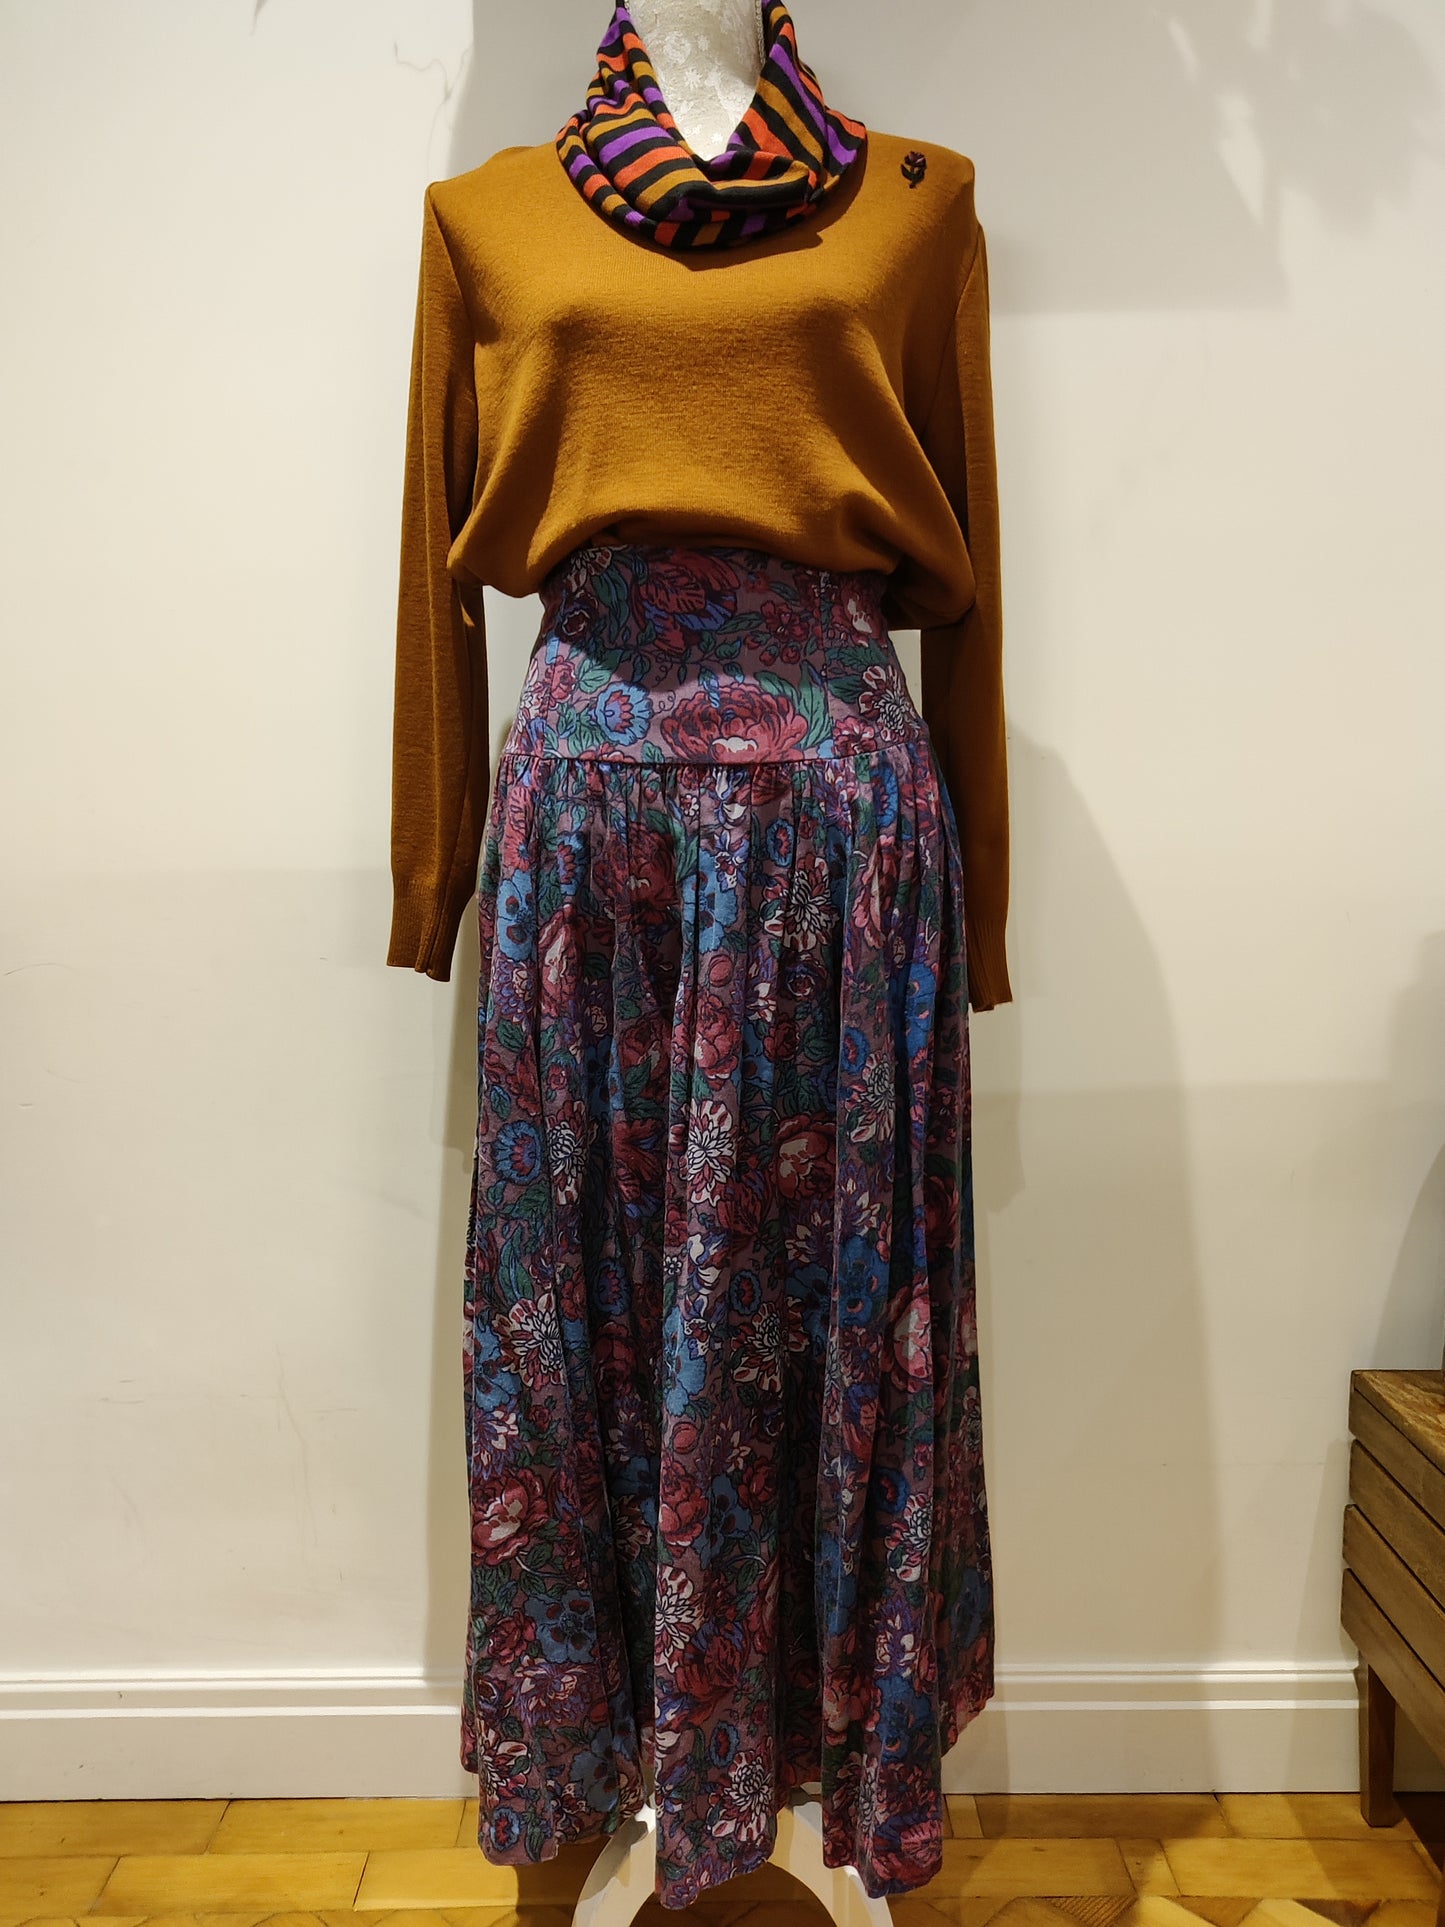 Vintage laura Ashley maxi skirt in Autumnal floral print. 